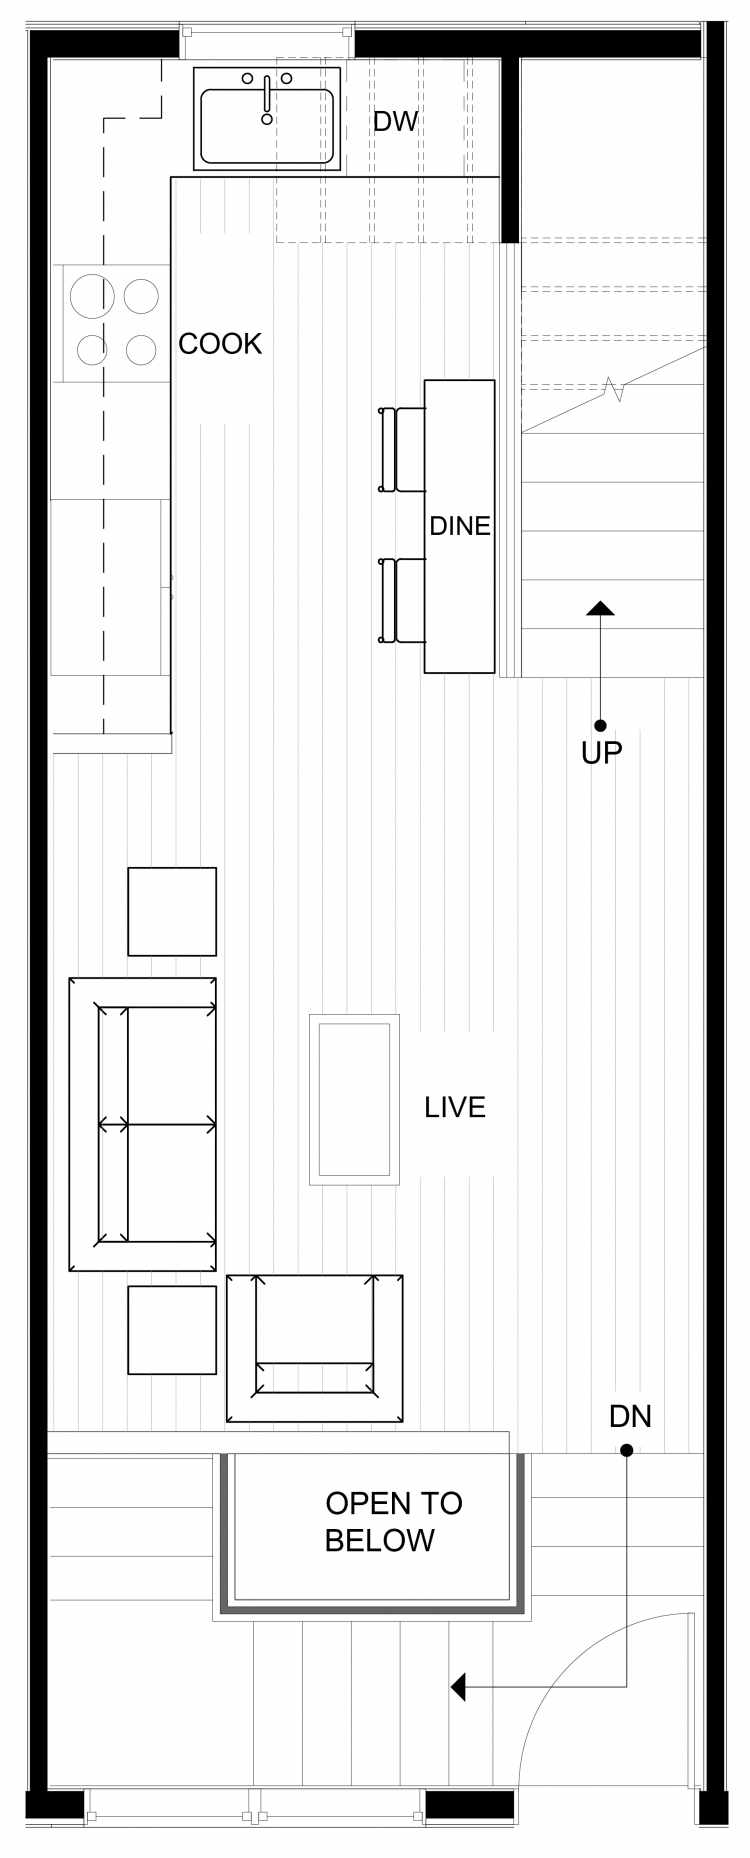 Second Floor Plan of 1540 15th Ave E, One of the Grandview Townhomes in Capitol Hill